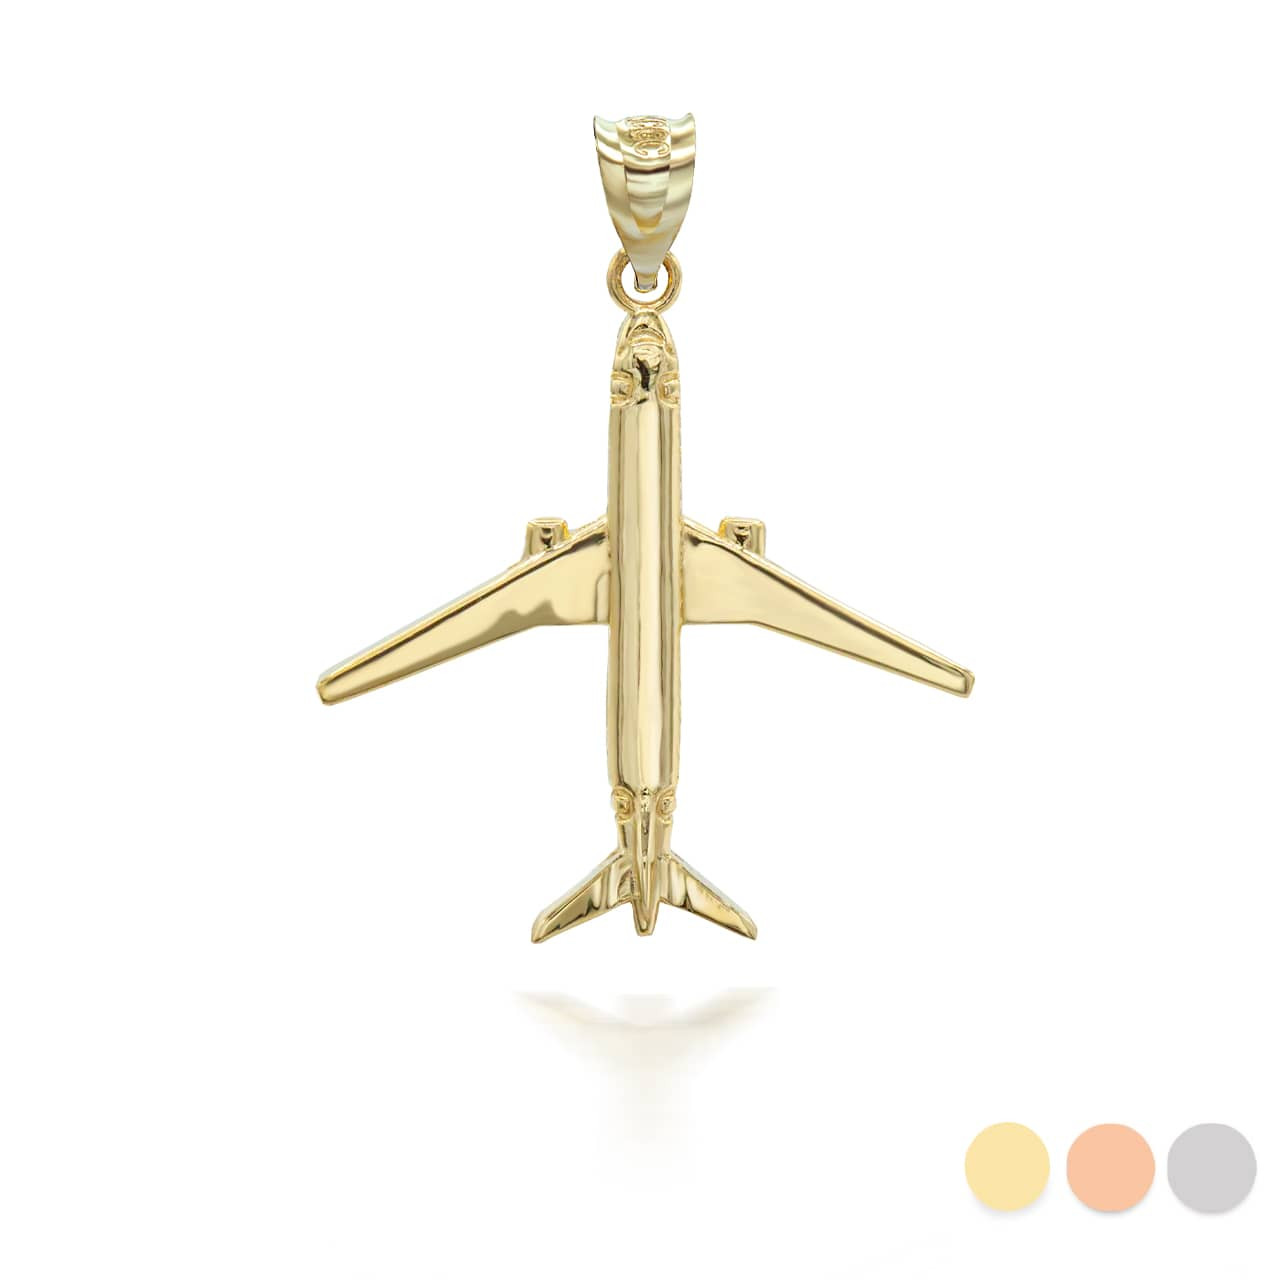 Gold Airplane Pendant Necklace Gold M | Factory Direct Jewelry